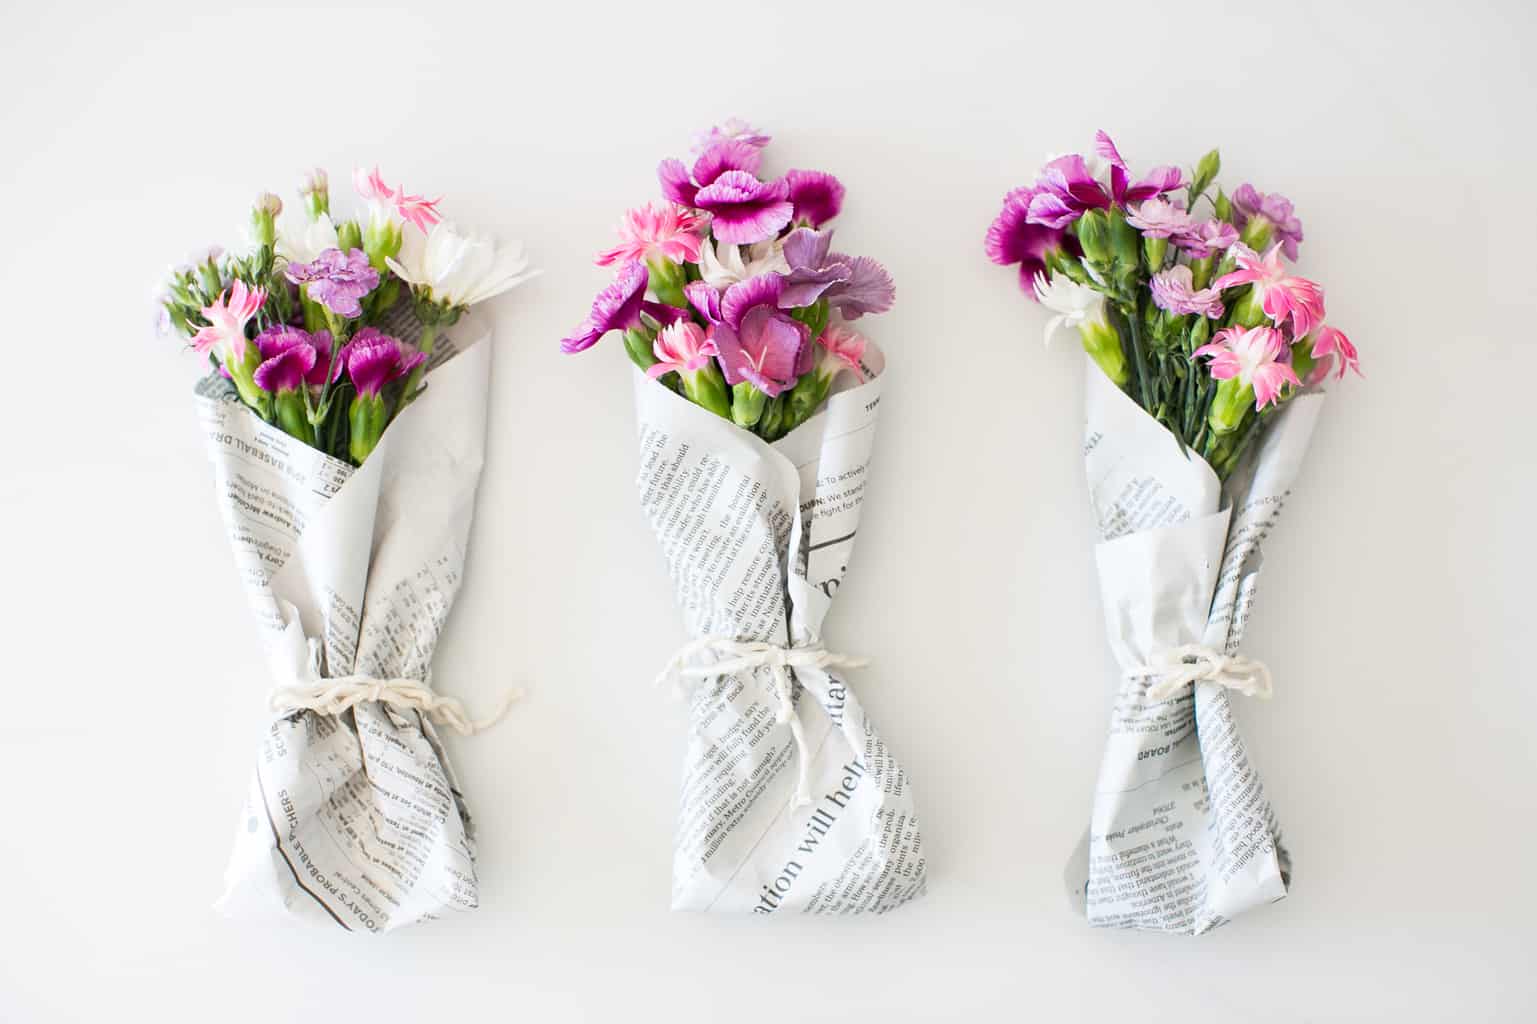 How to Make Mini-Bouquets with Grocery Store Flowers